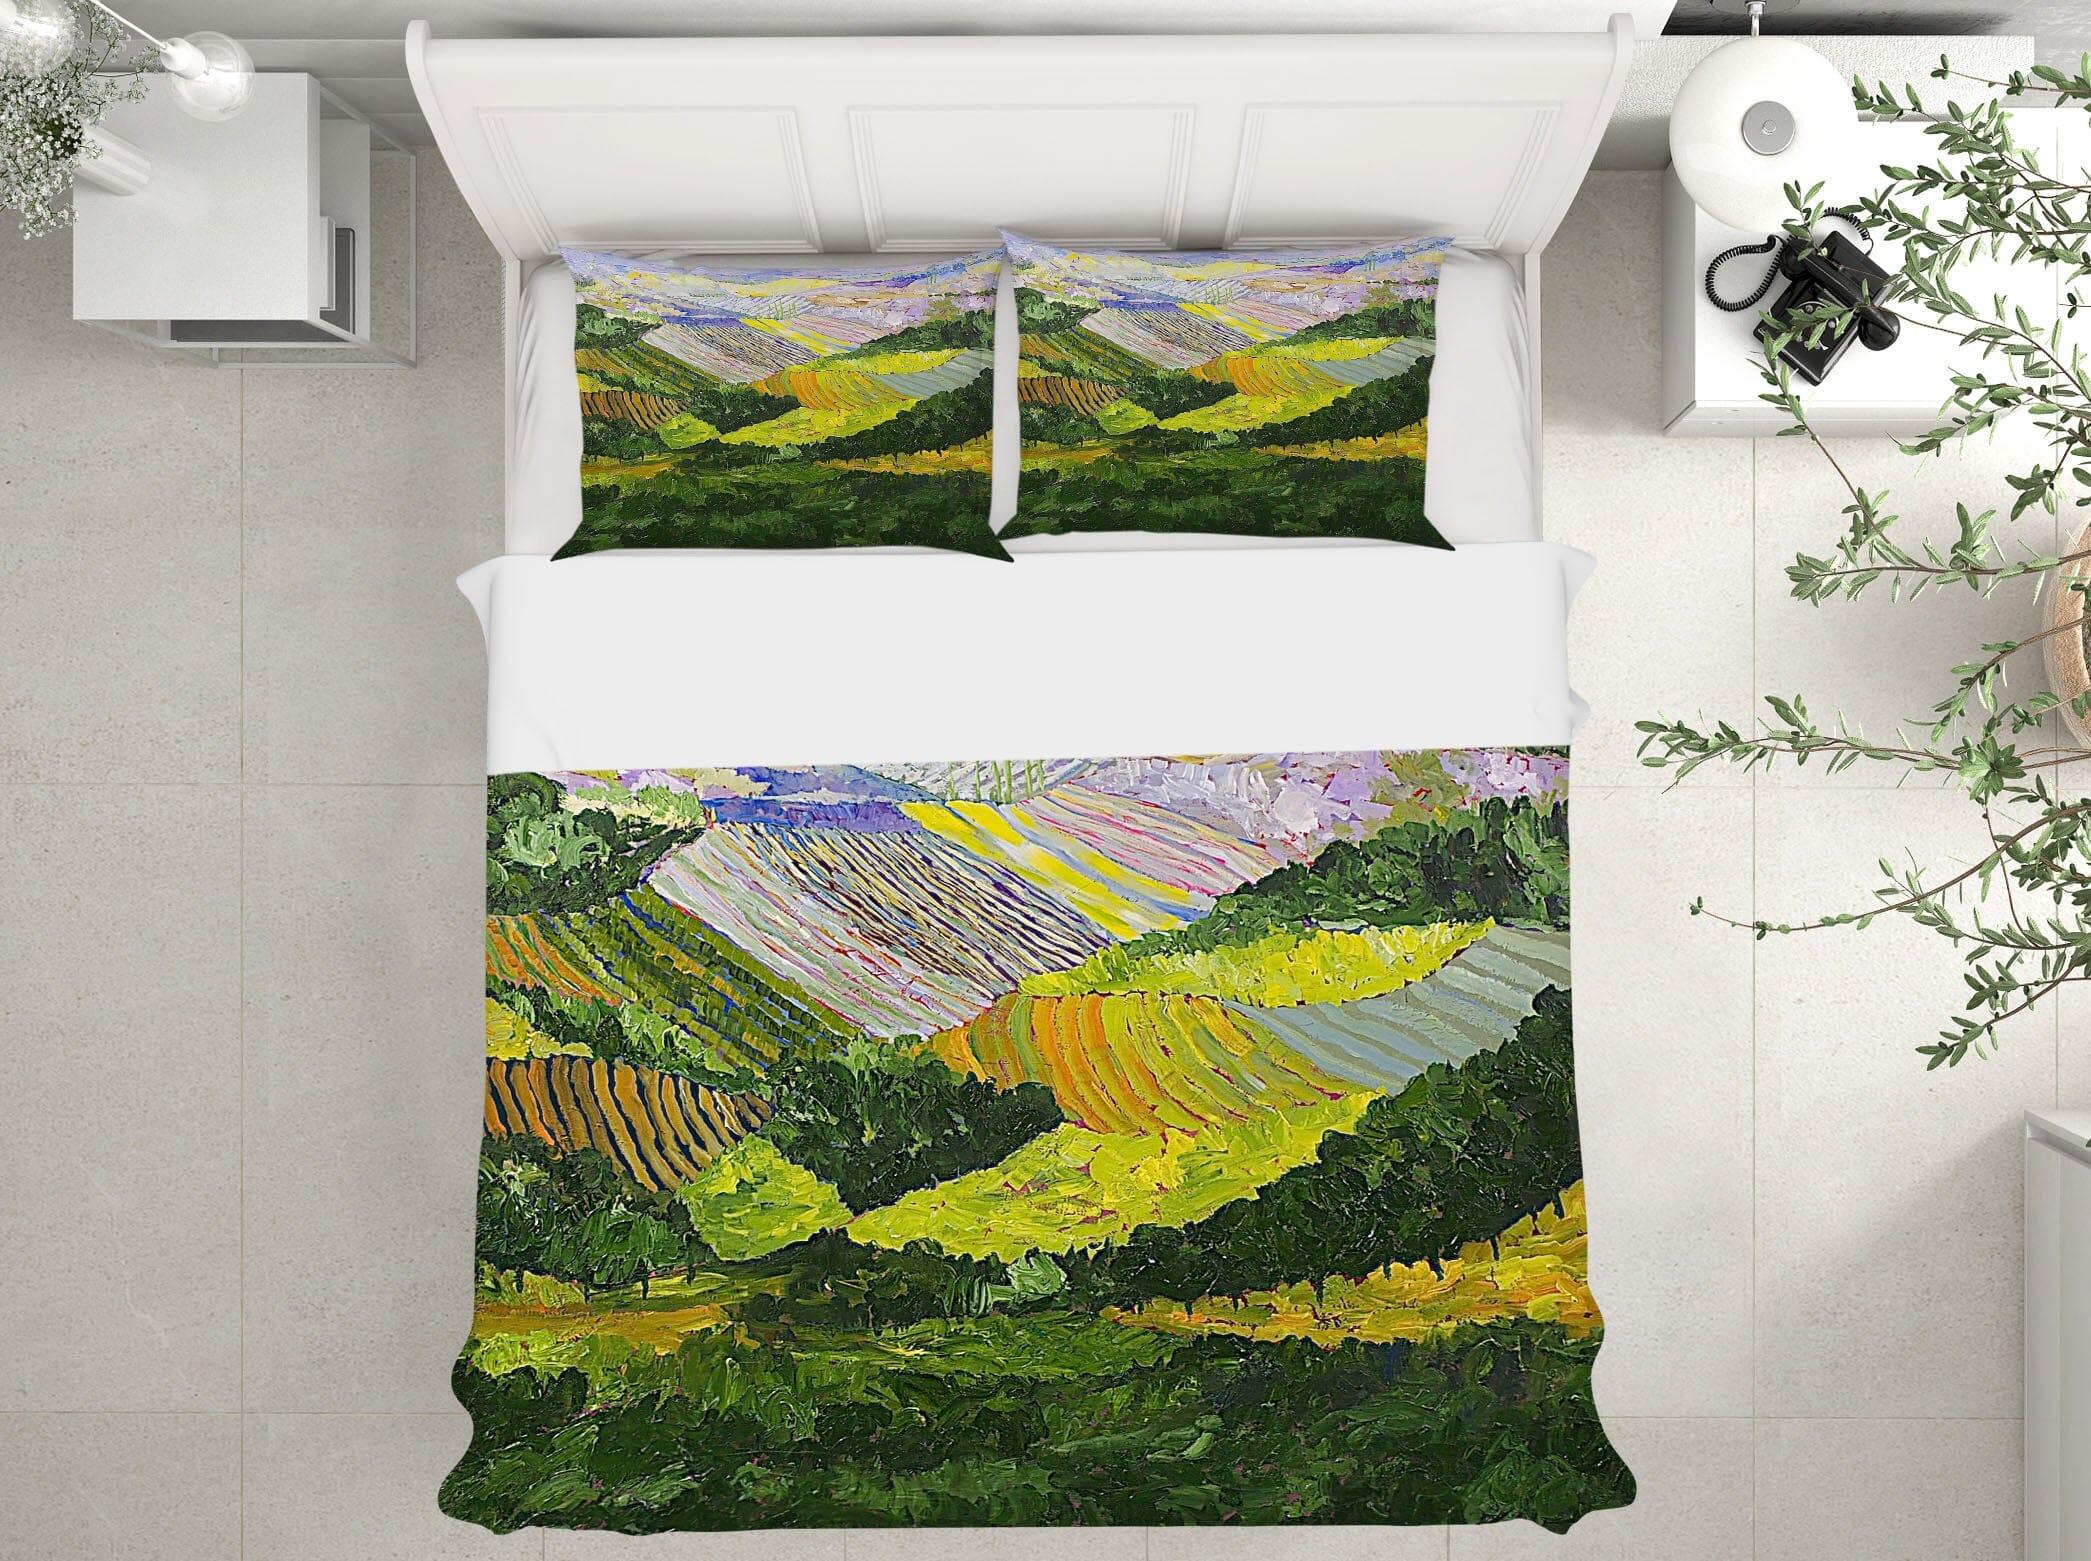 3D Forest And Harvest 2106 Allan P. Friedlander Bedding Bed Pillowcases Quilt Quiet Covers AJ Creativity Home 